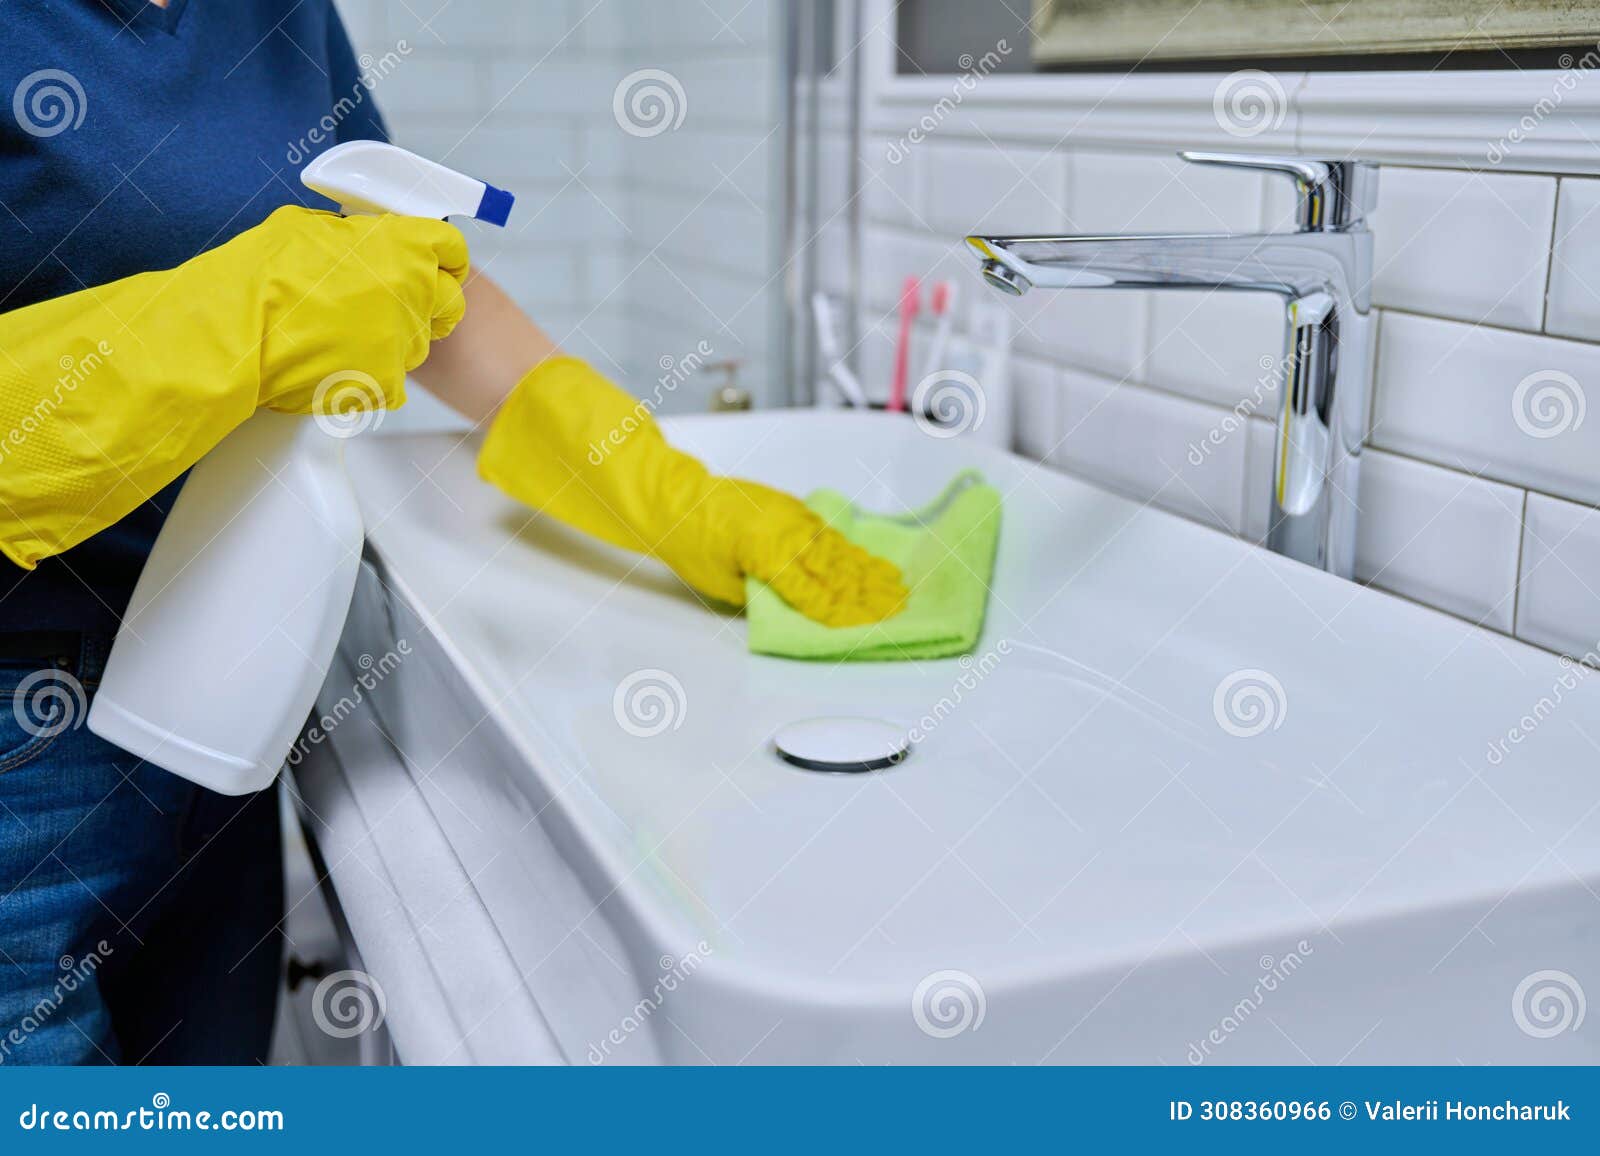 close-up of cleaning sink with faucet in bathroom, hands in gloves with detergent